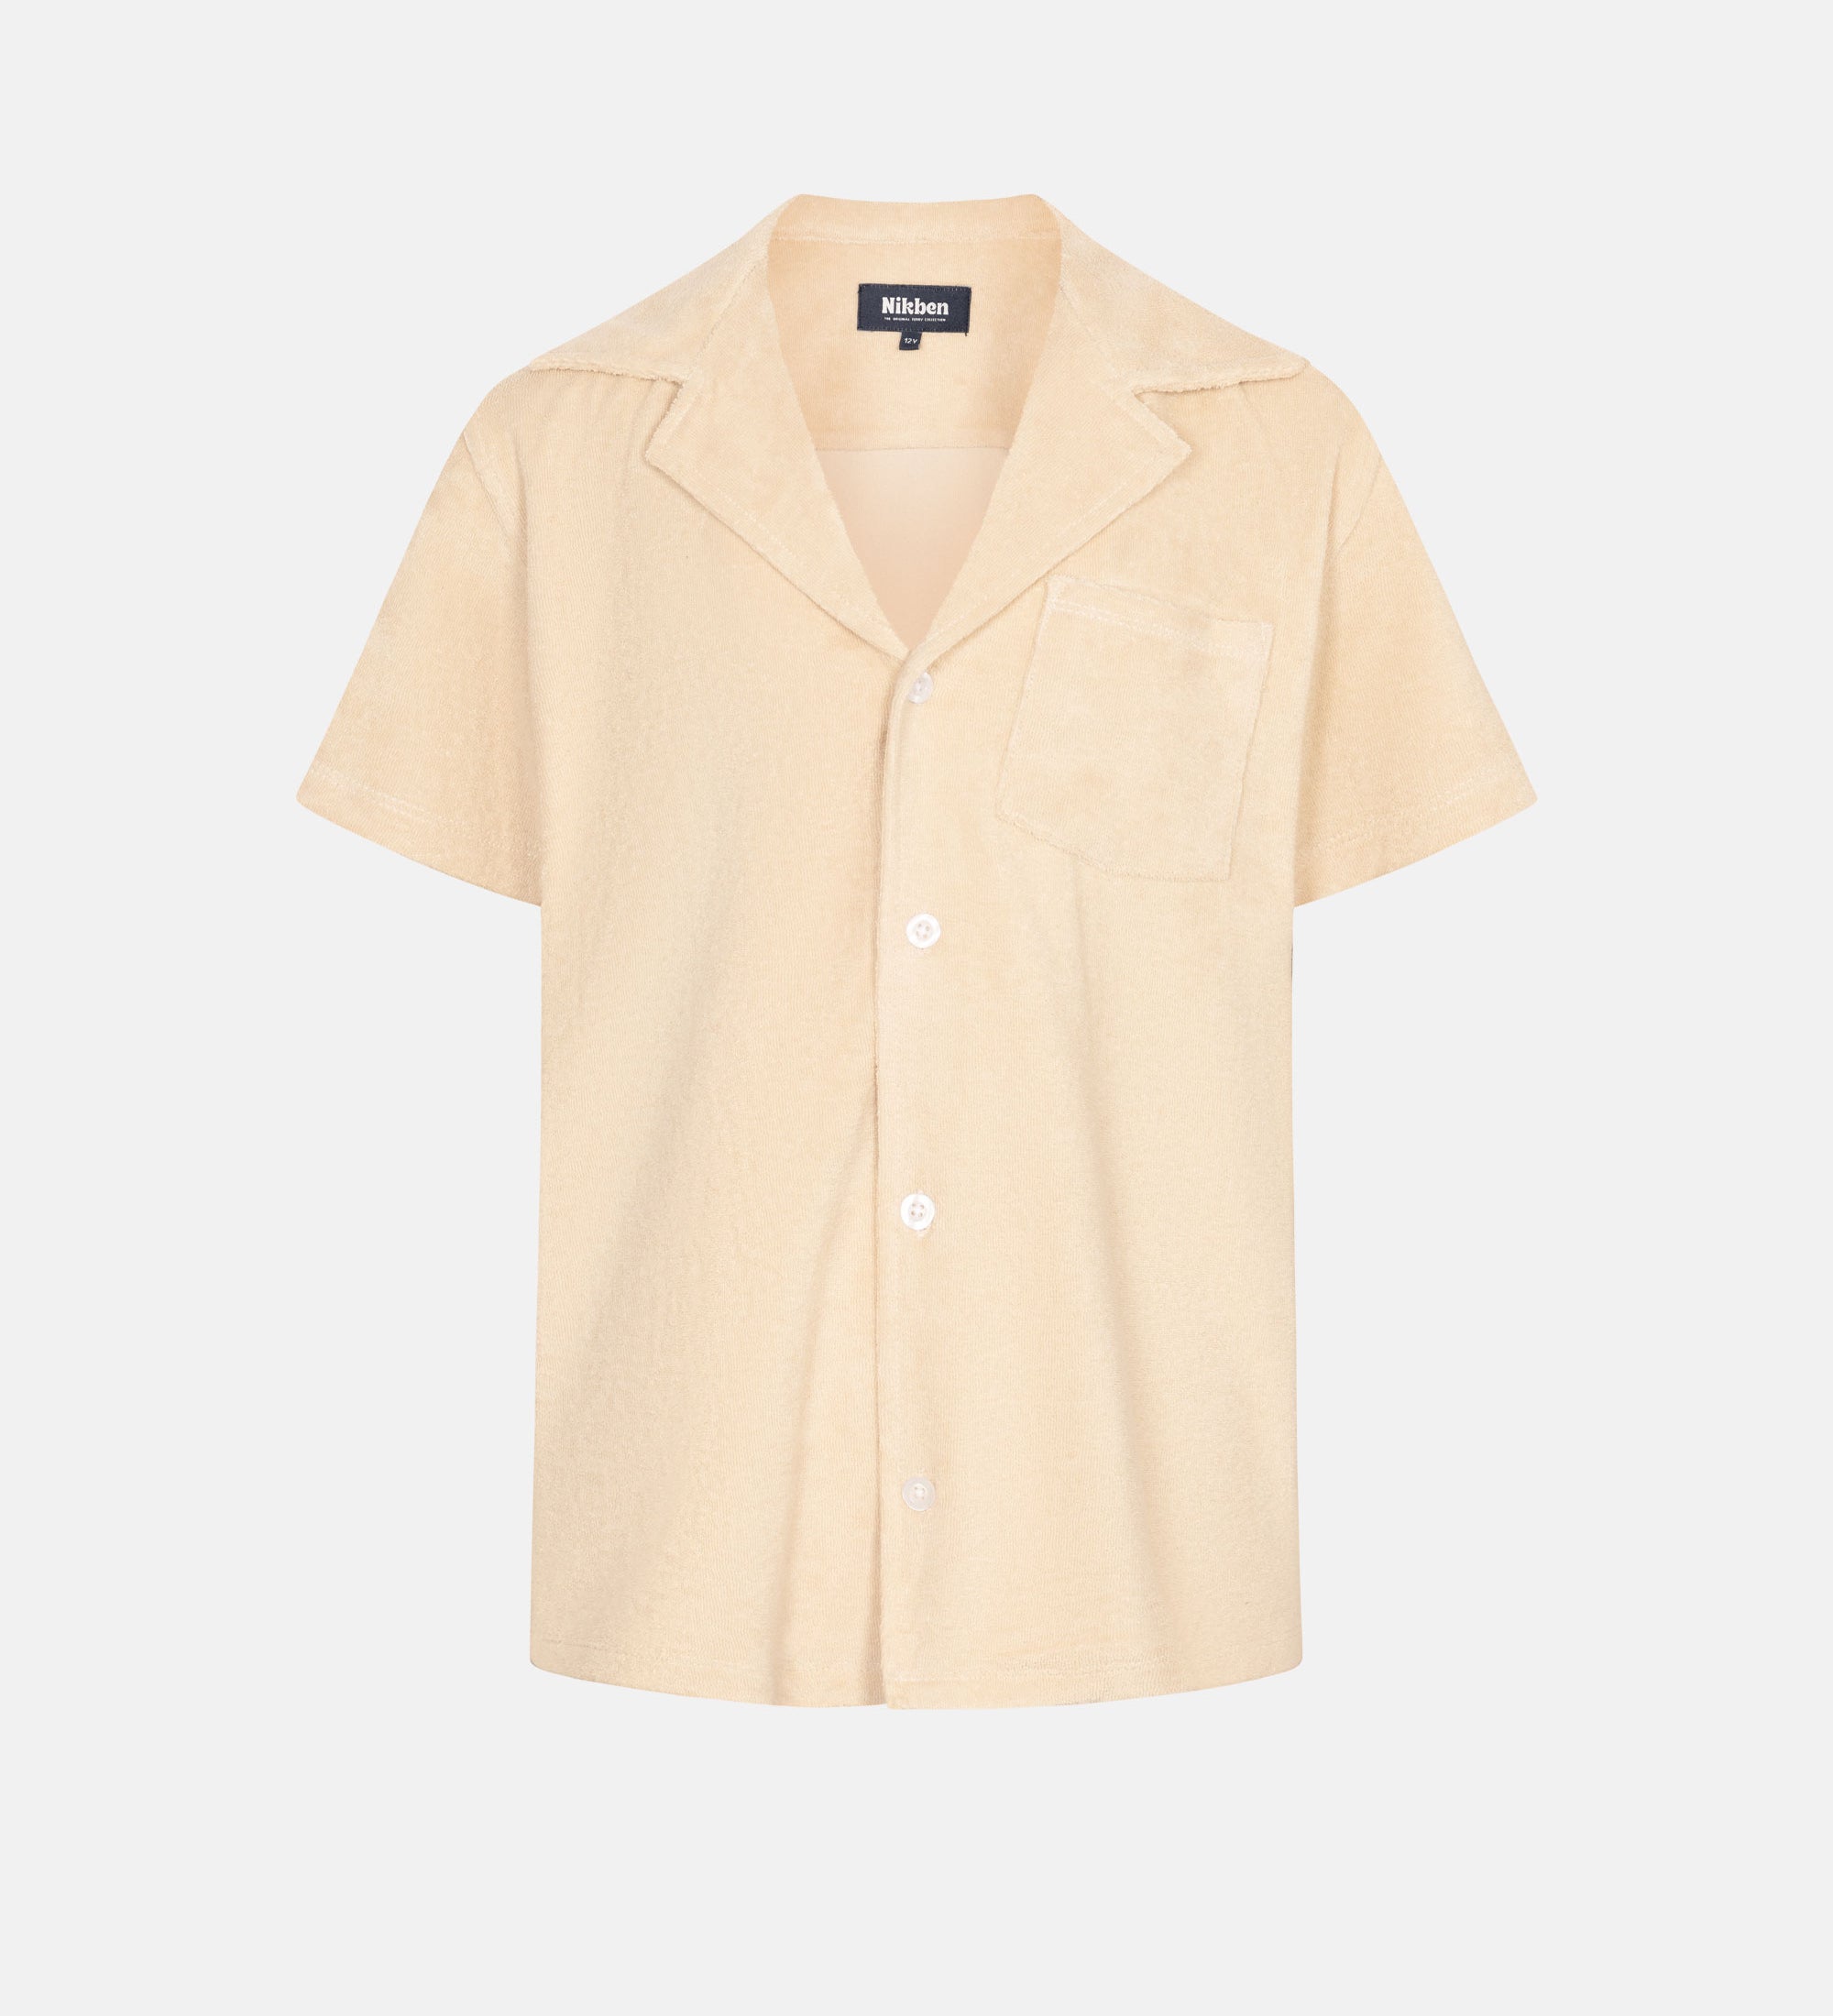 Beige short sleeve shirt with white button closure and one chest pocket